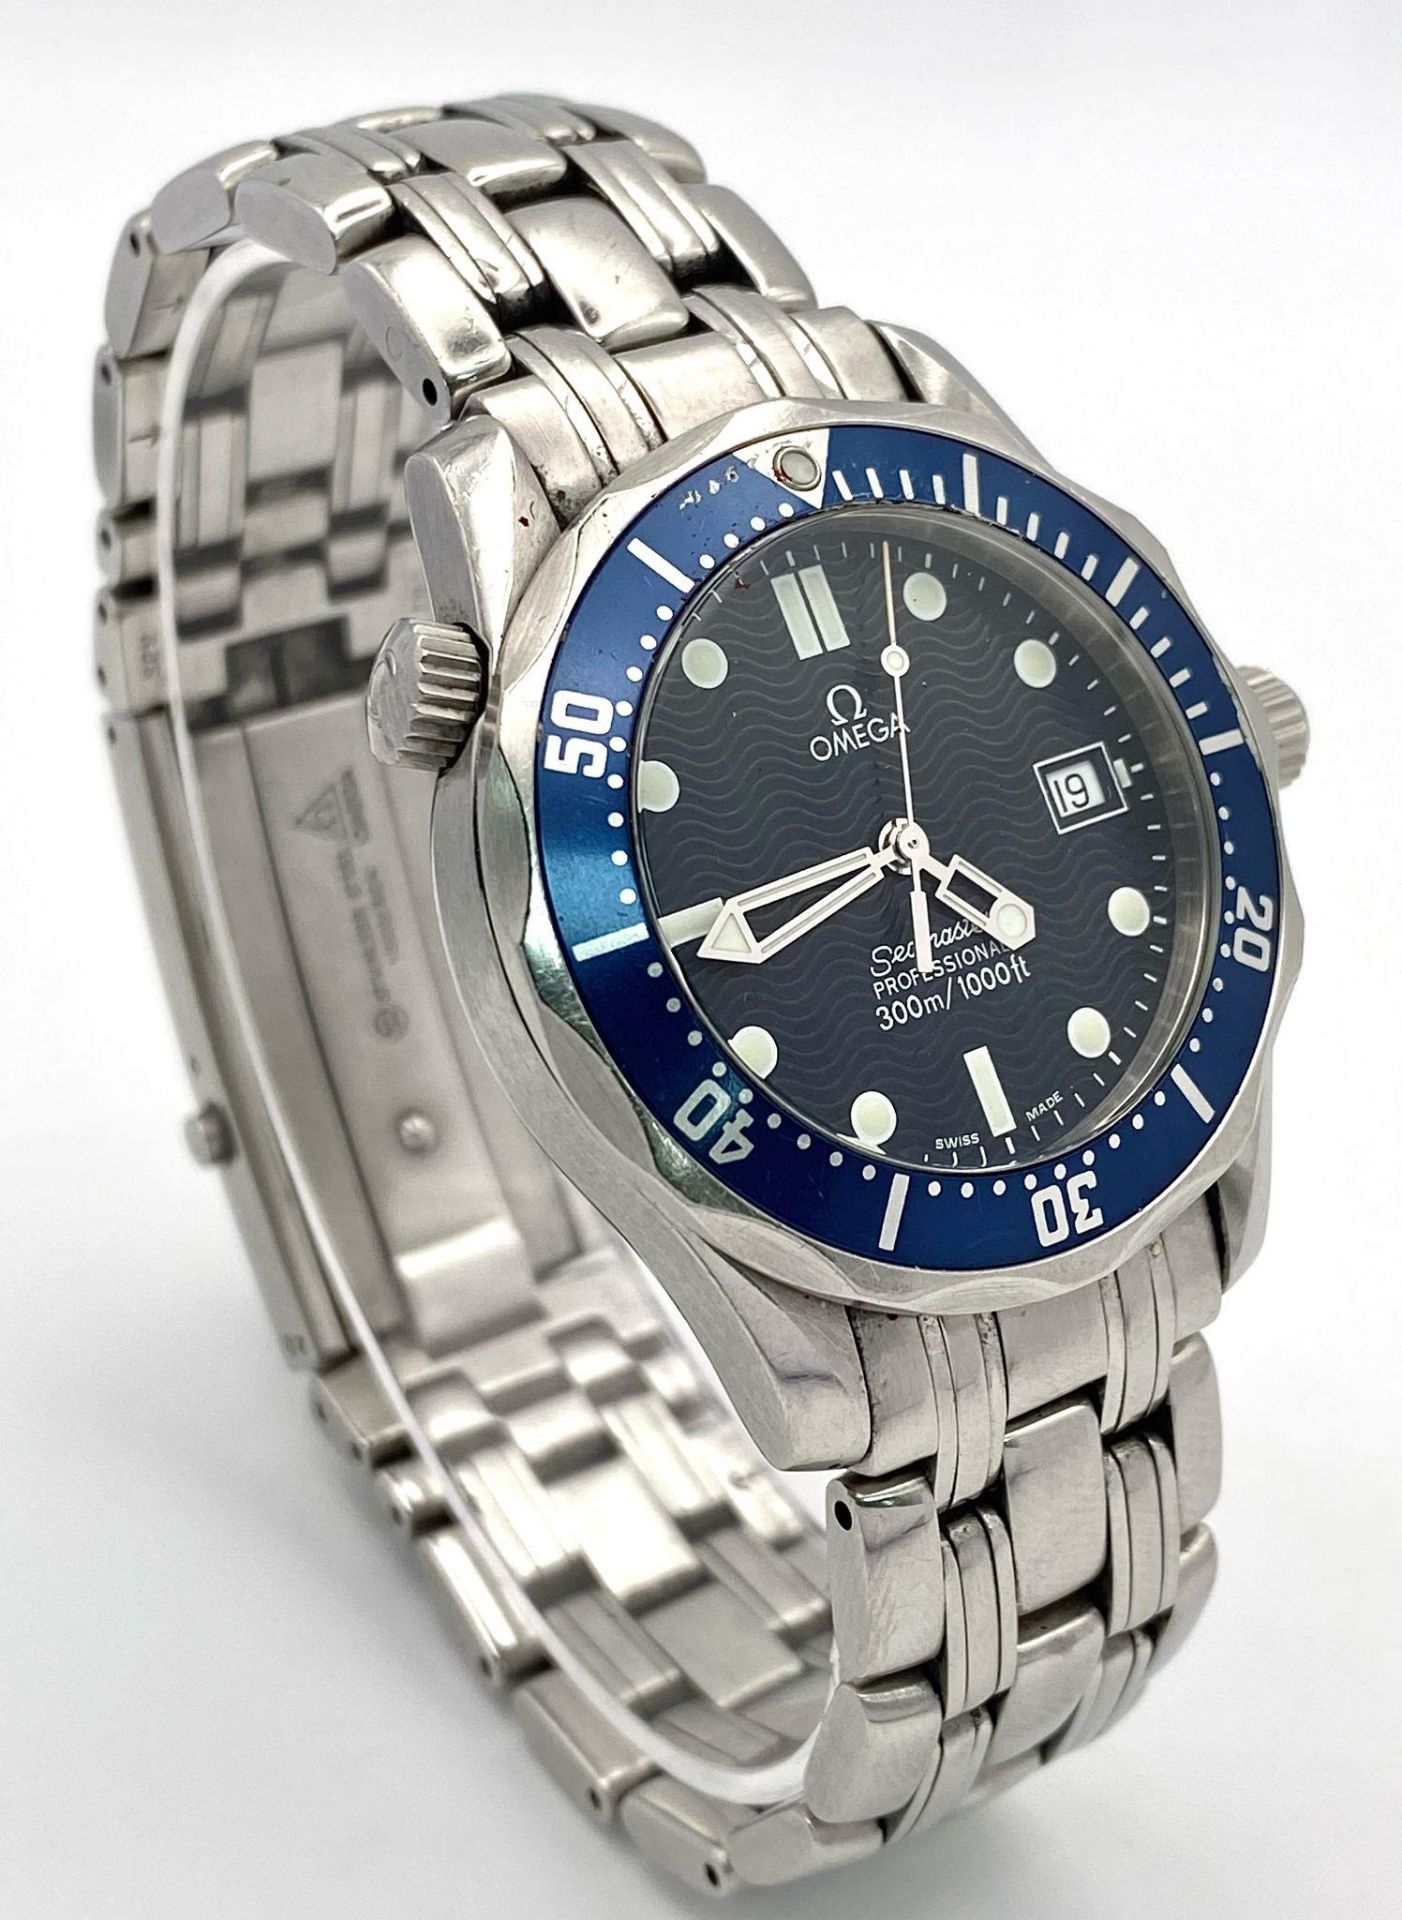 An Omega Seamaster Professional Quartz Divers Watch. Stainless steel bracelet and case - 37mm. - Image 3 of 9